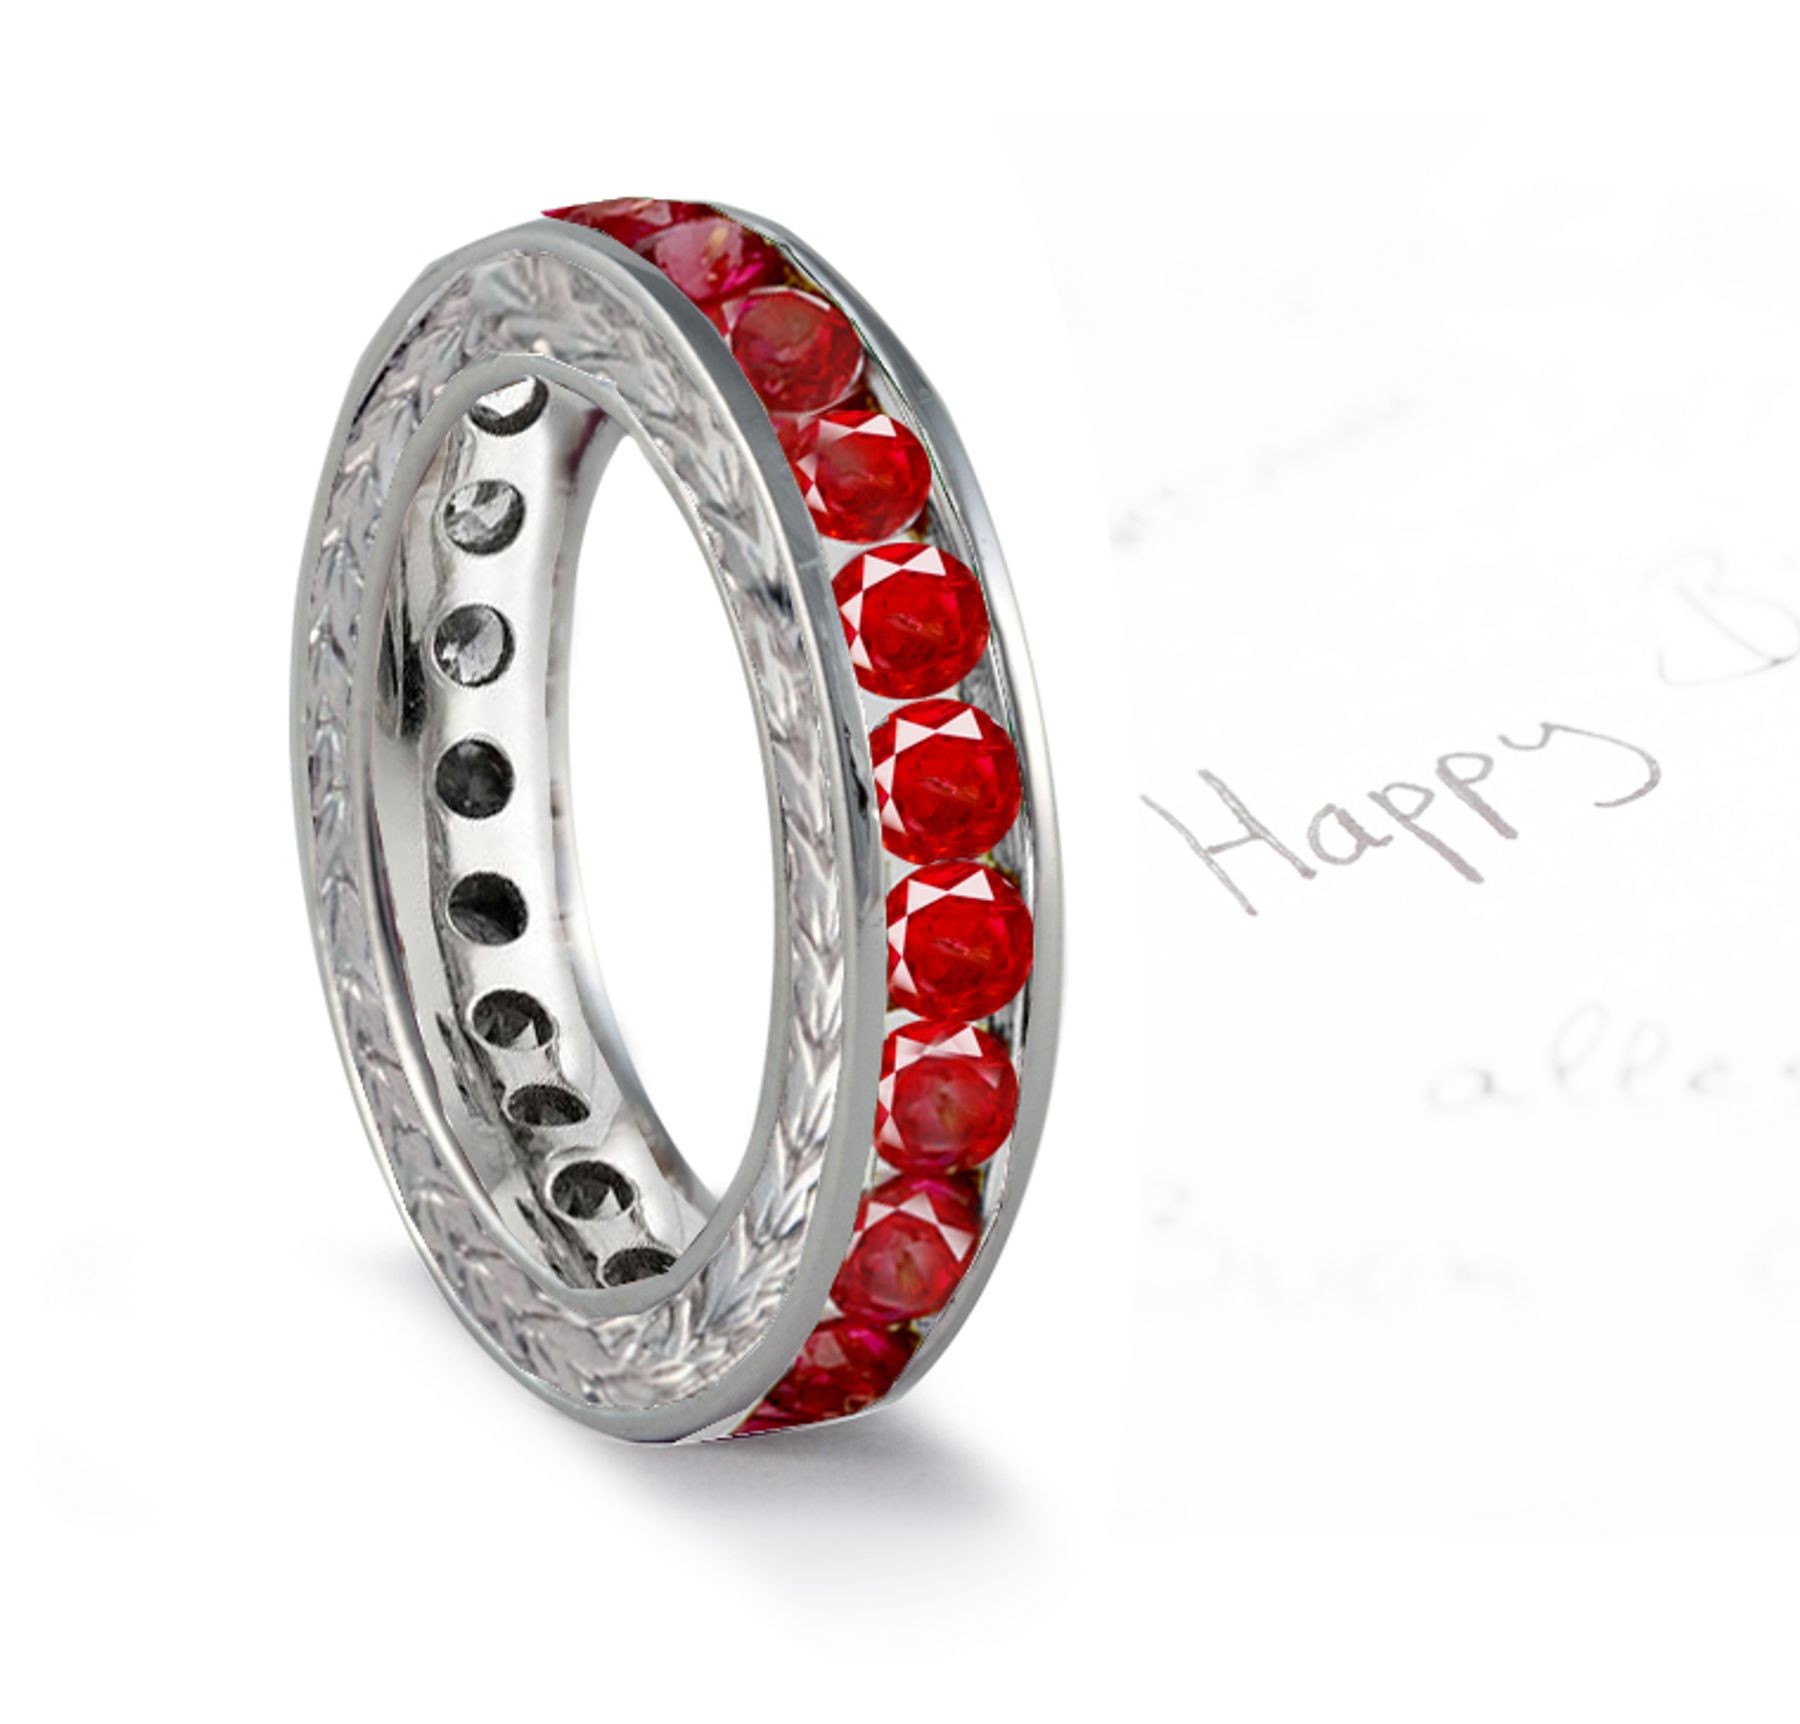 Well-Cut Ruby Wedding Band with Scrolls Motifs on Sides in 14k Gold